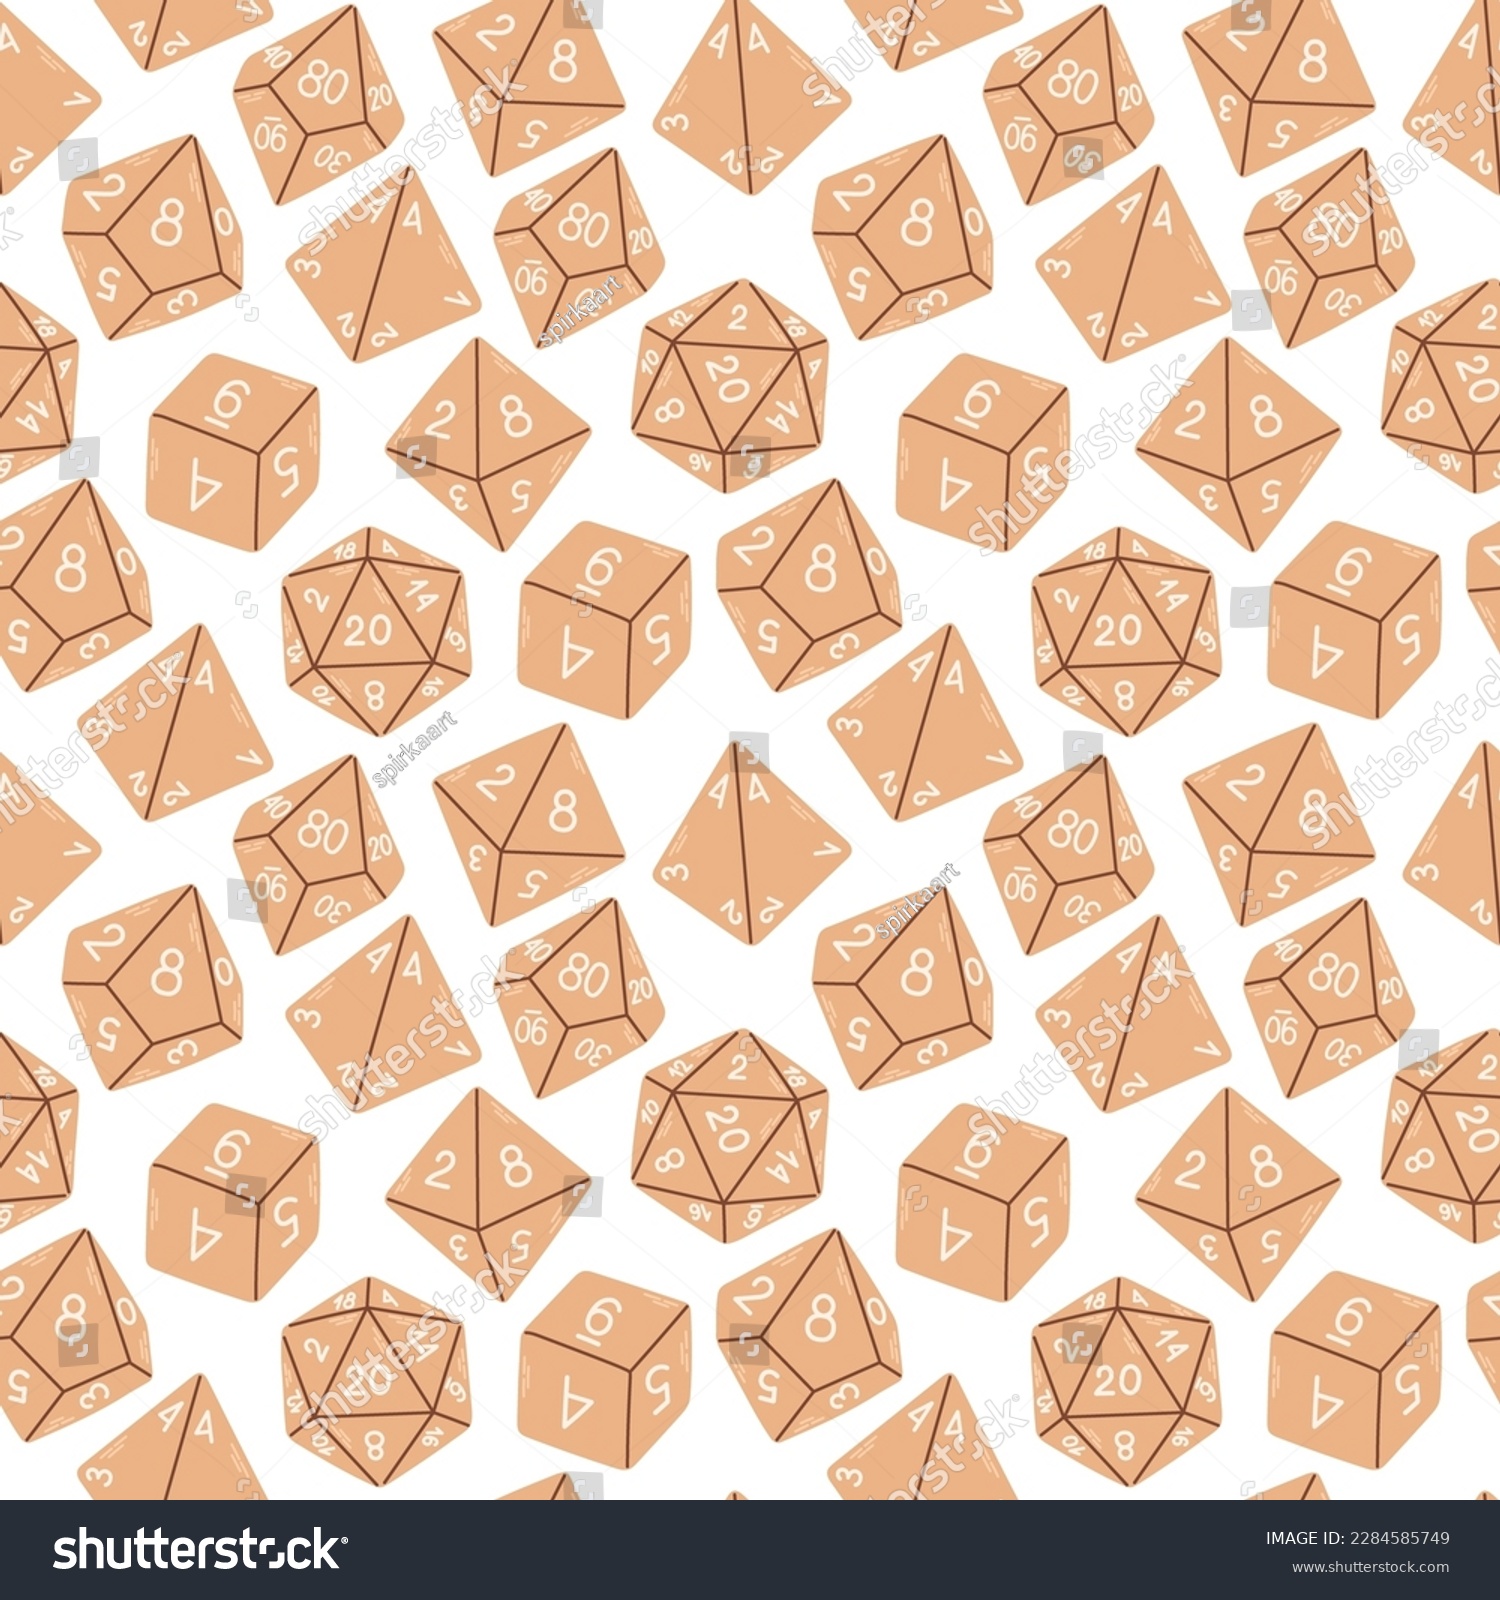 SVG of D8 D10 D12 D20 Dice for Board games seamless pattern, RPG dice set for table game vector svg